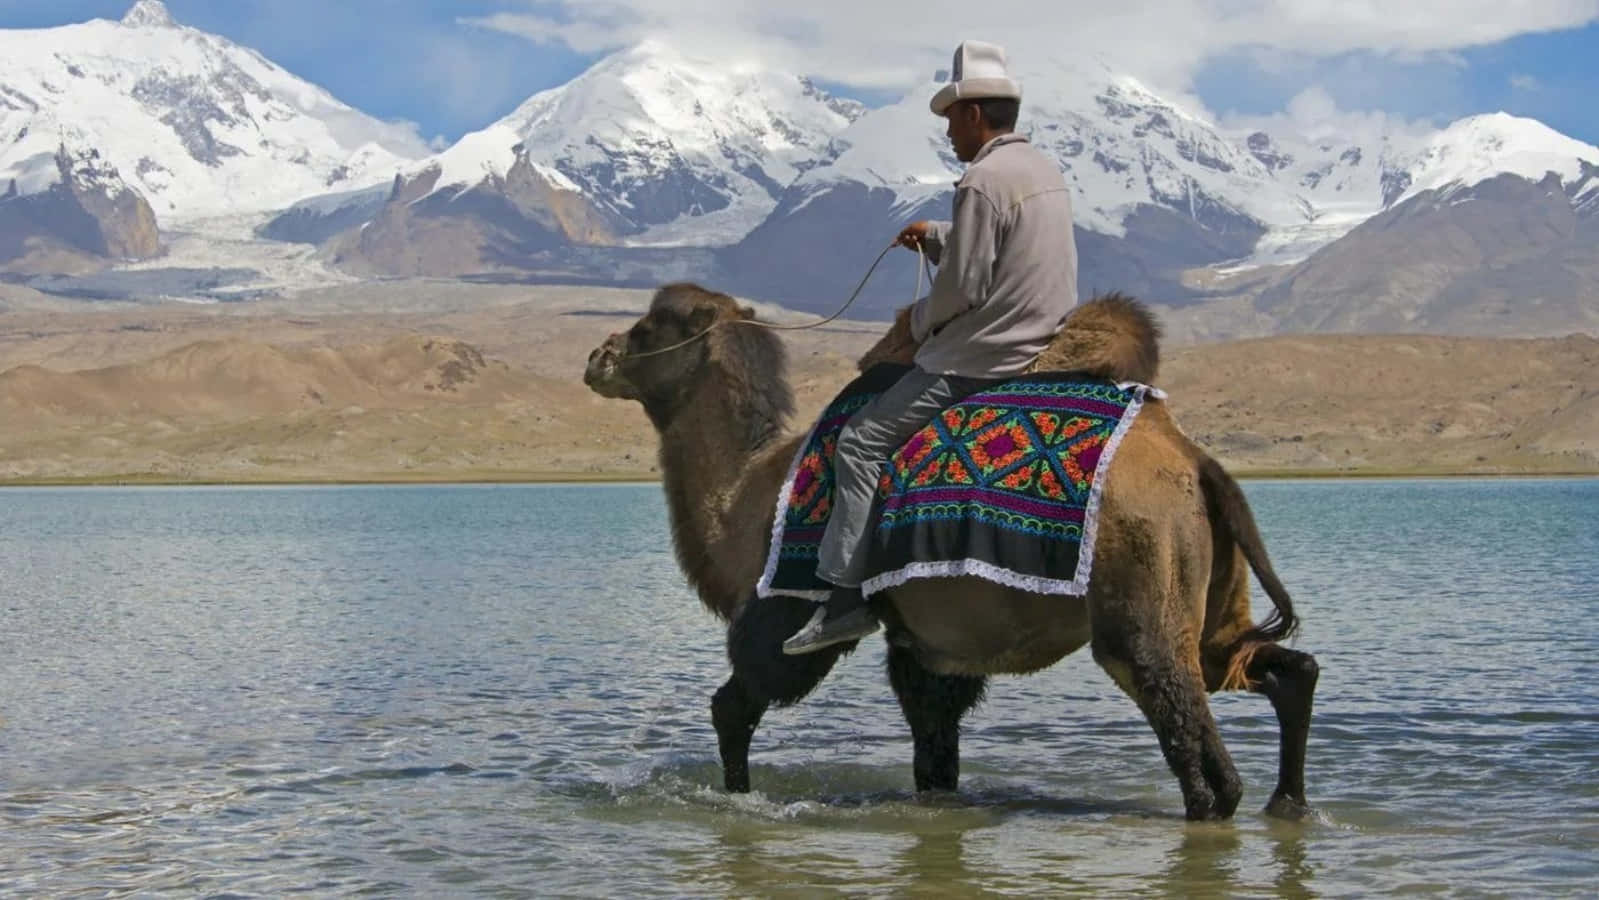 a man riding a camel in the water with mountains in the background